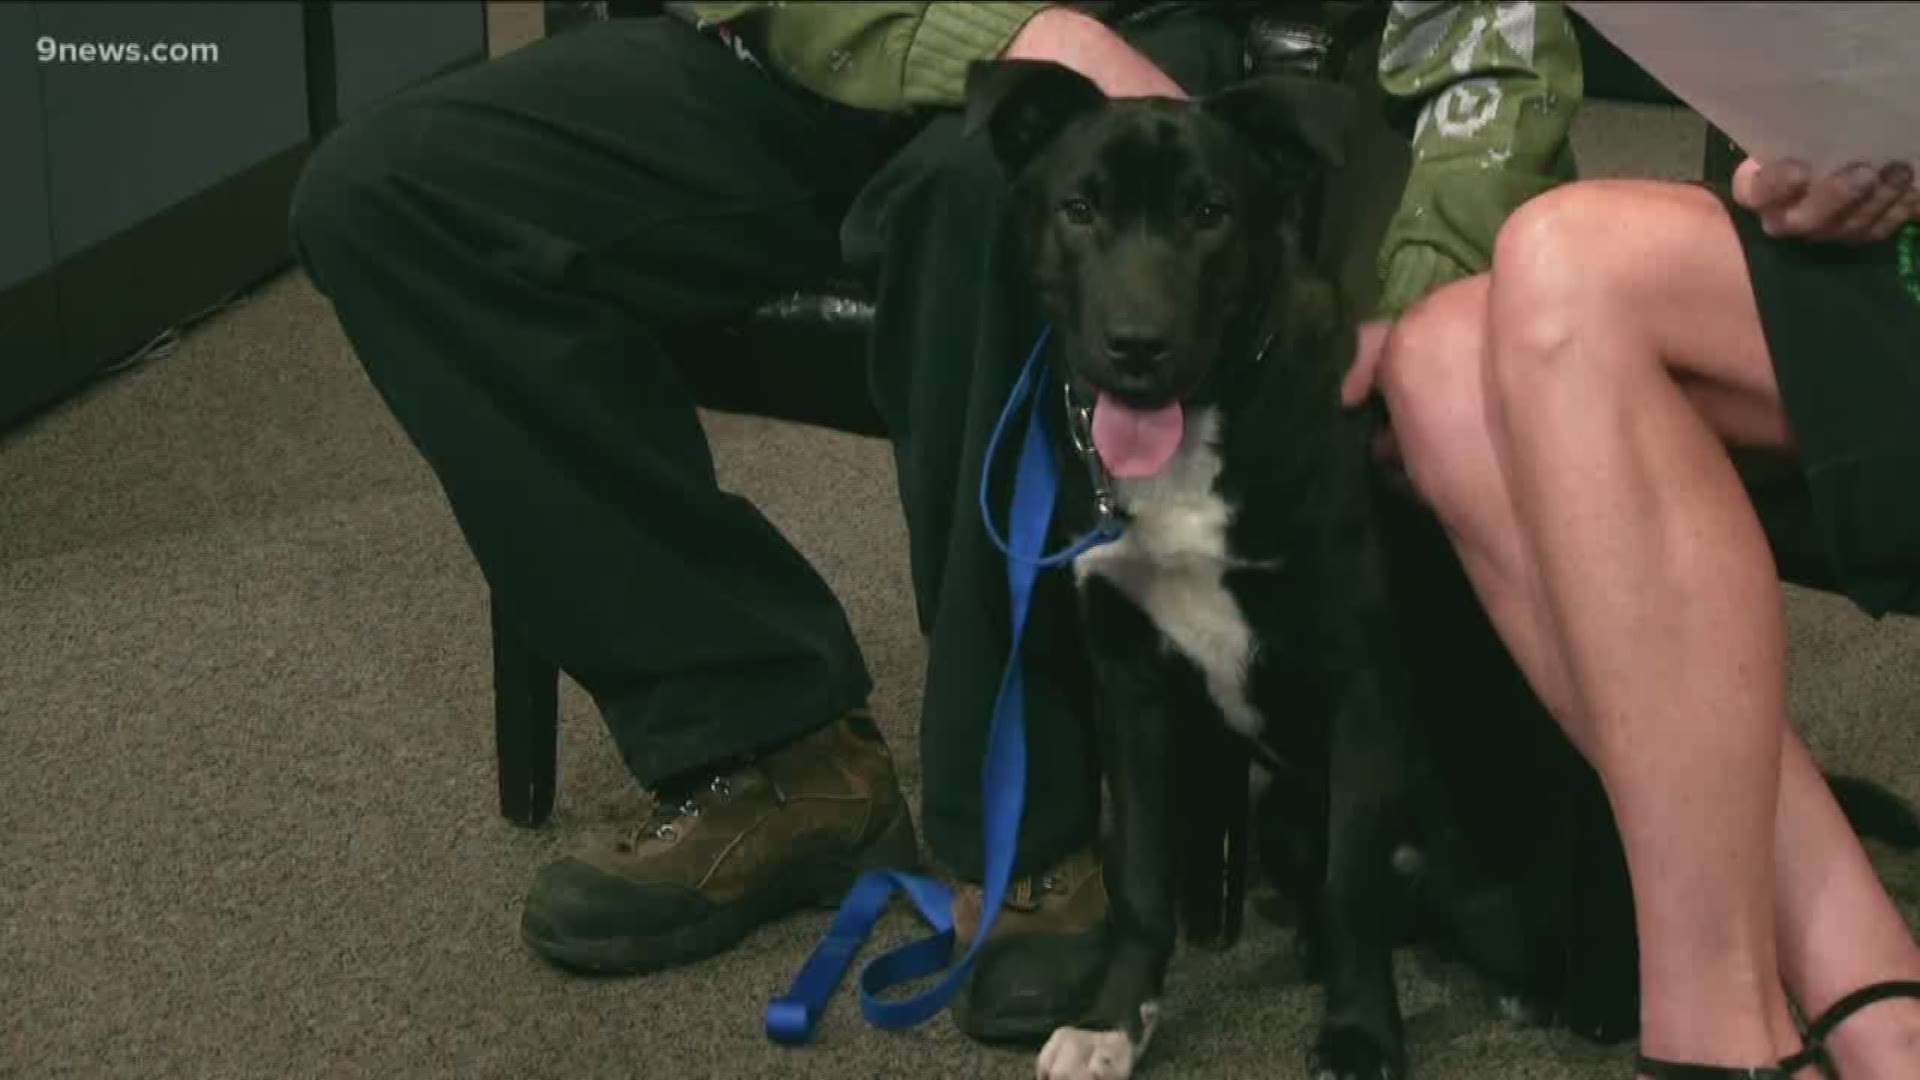 Shadow needs a forever home where he can get plenty of exercise! He's at the Humane Society of the South Platte Valley: 303-703-2938.